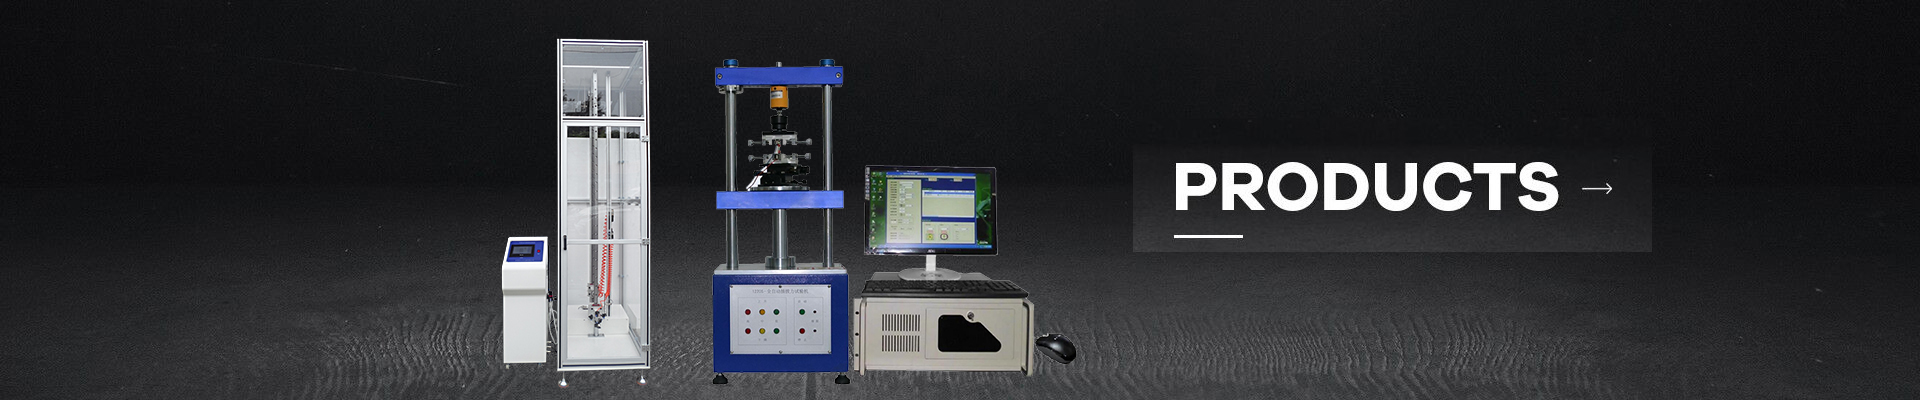 Mobile Phone & Electronic Test Itruments-DONGGUAN ZONHOW TEST EQUIPMENT